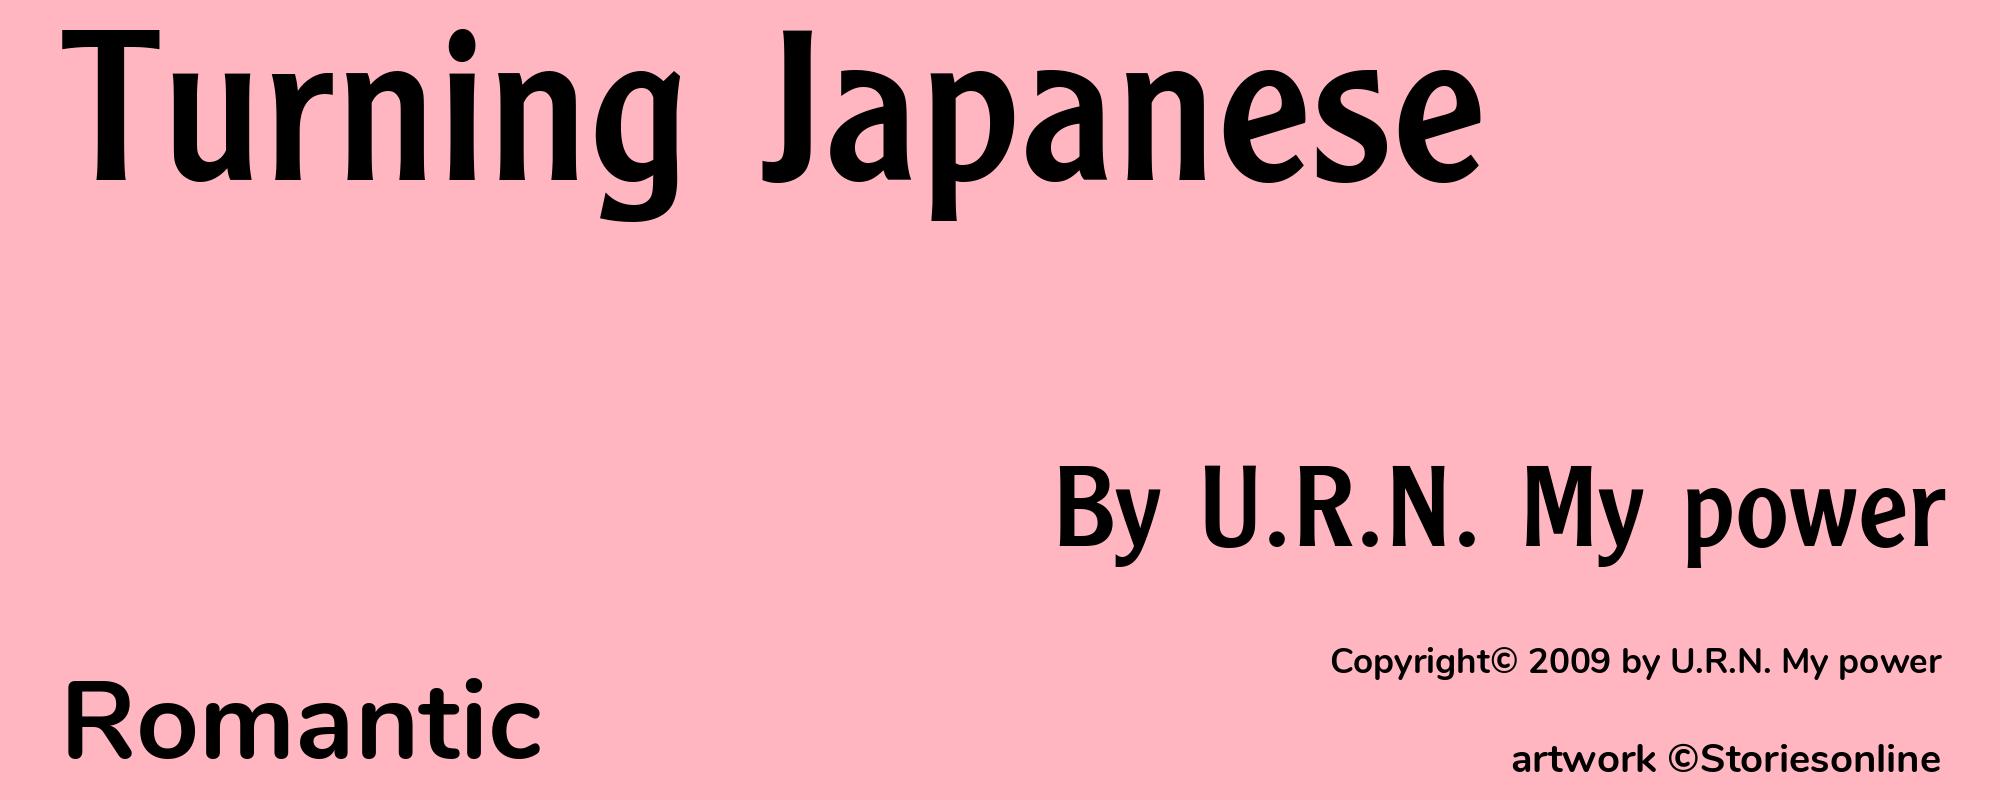 Turning Japanese - Cover